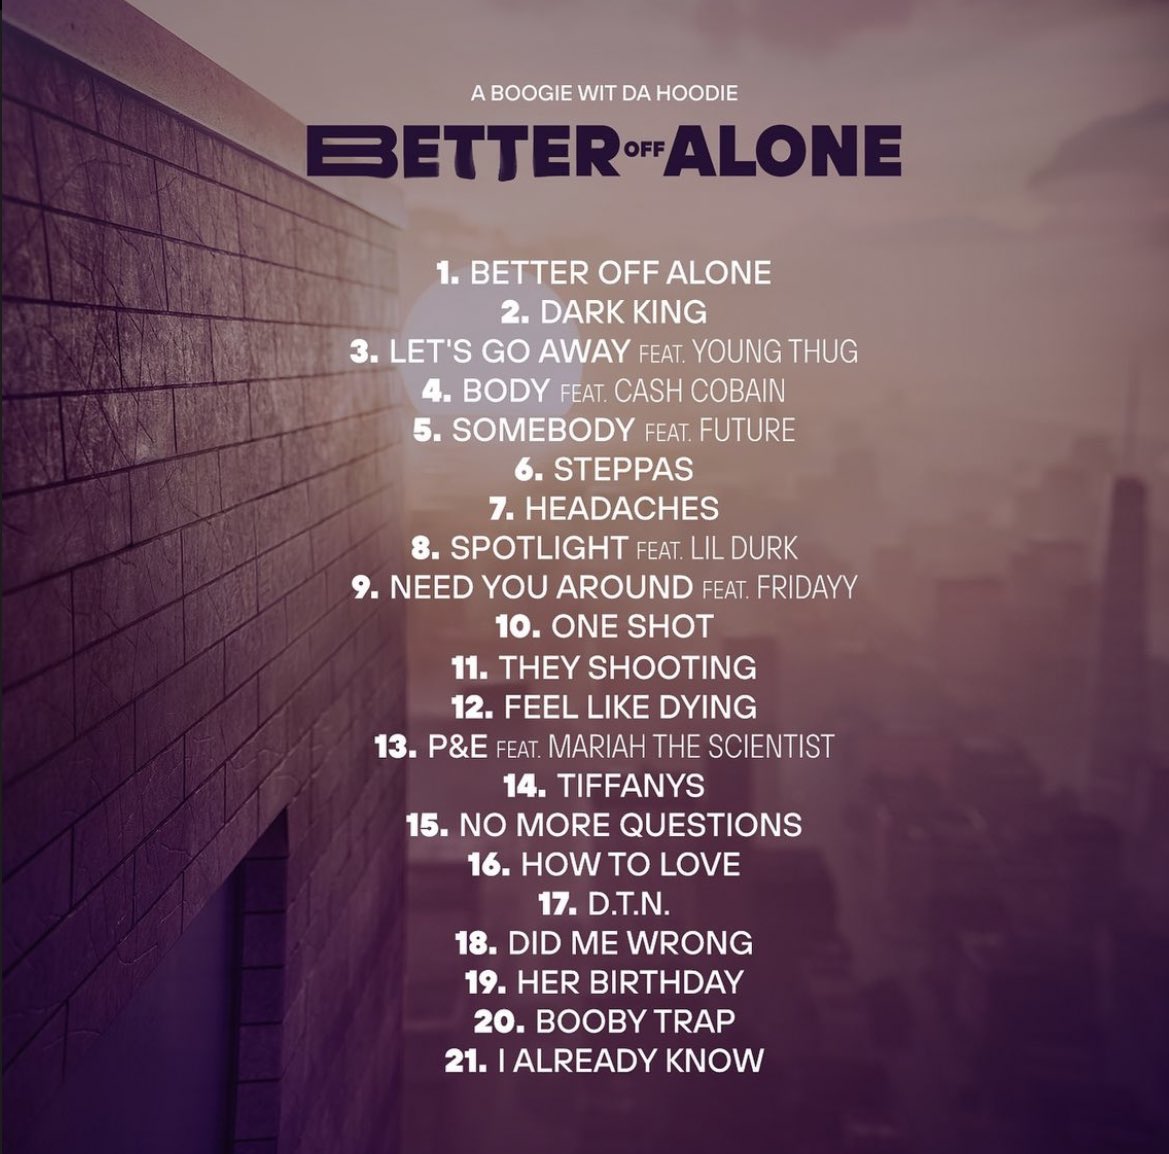 A BOOGIE WIT DA HOODIE BETTER OFF ALONE 💿 TRACKLIST 🚨MAY 17TH🚨 Features: ▫️Future ▫️Young Thug ▫️Lil Durk ▫️Cash Cobain ▫️Mariah The Scientist ▫️Fridayy 21 Tracks. Thoughts?